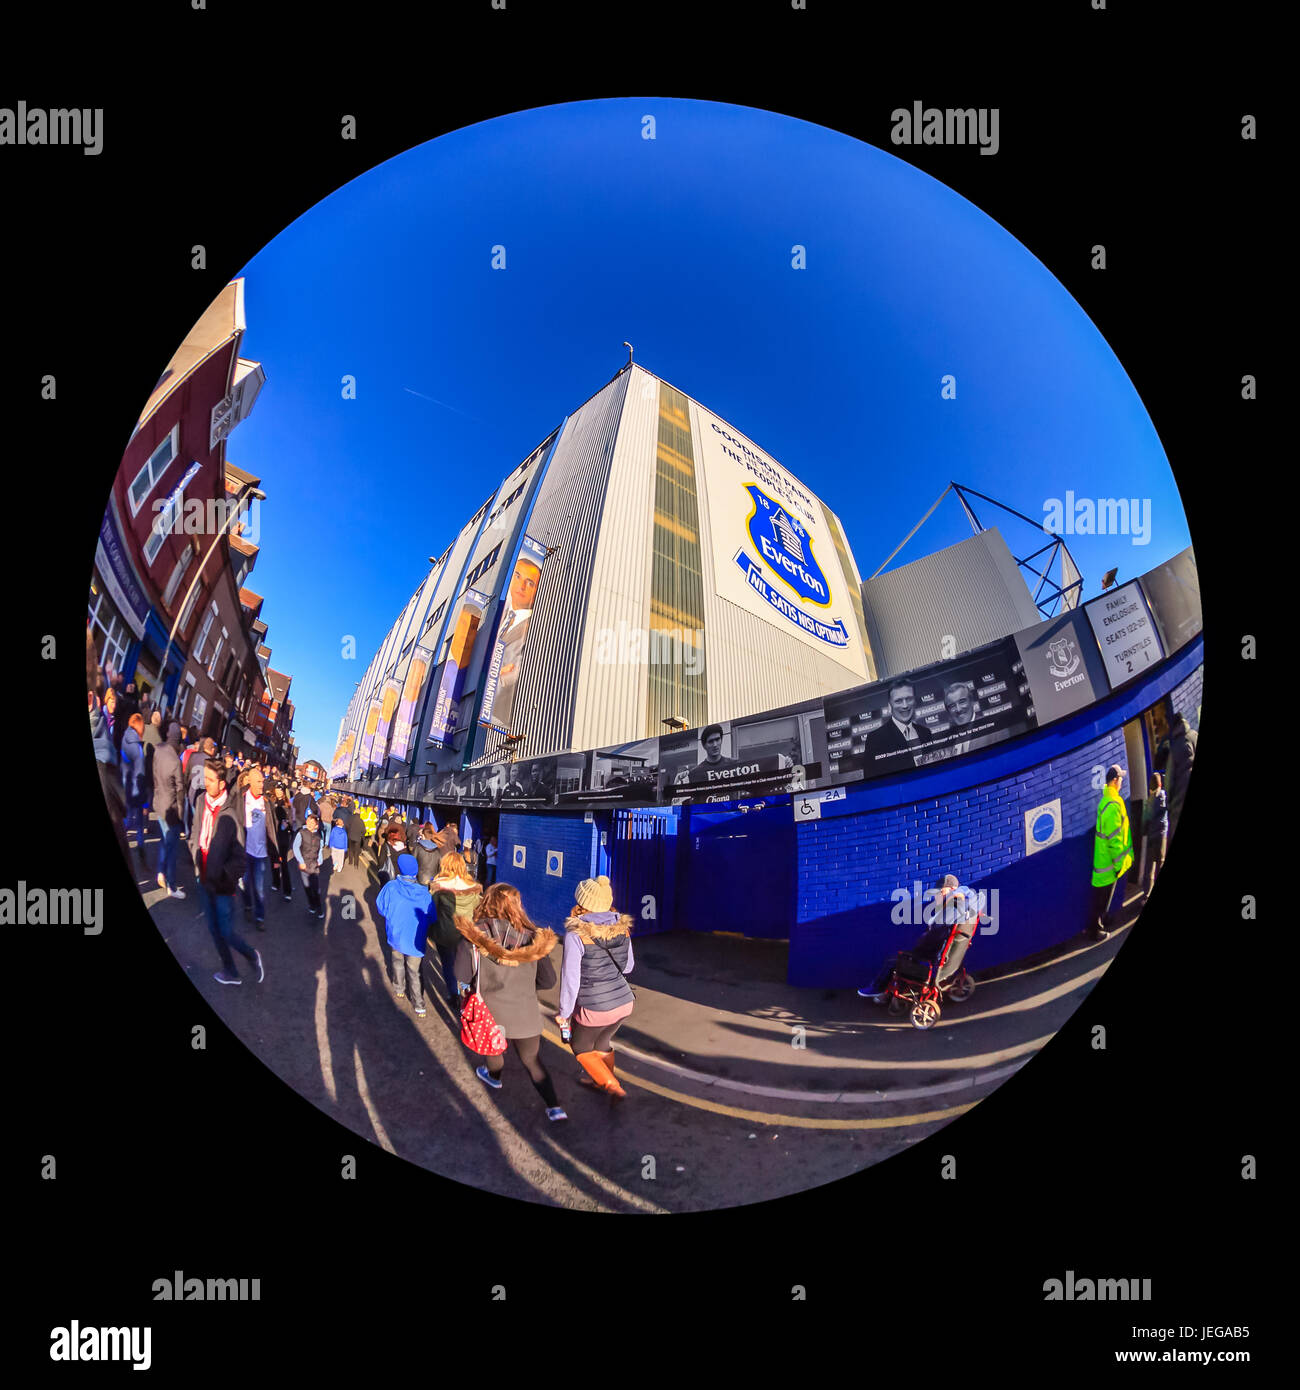 Goodison Park home of Everton Football Club.  The stadium is one of the oldest purpose built football stadiums in the world. Stock Photo